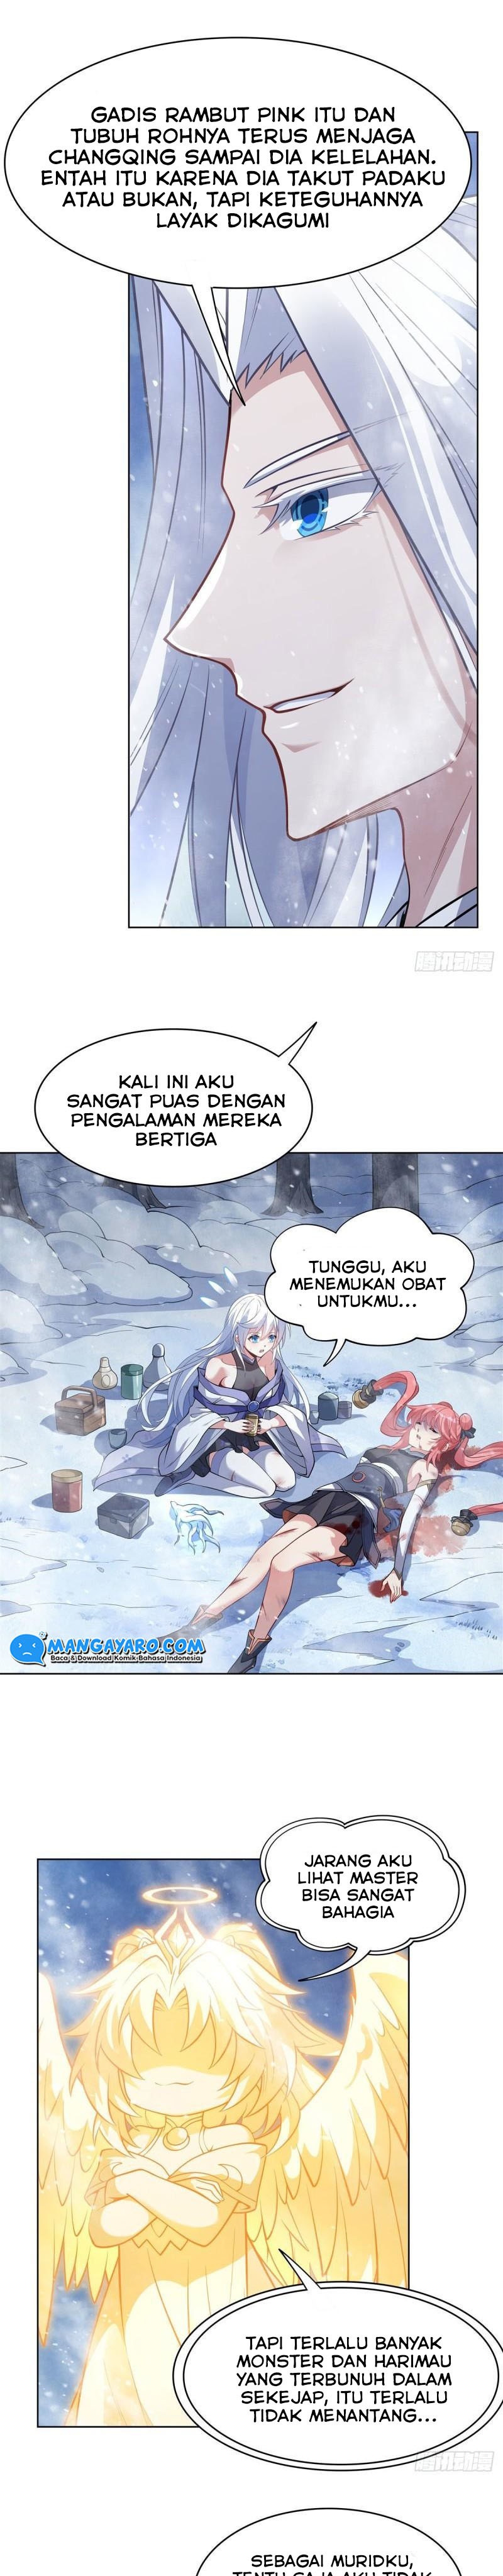 Dilarang COPAS - situs resmi www.mangacanblog.com - Komik my female apprentices are all big shots from the future 051 - chapter 51 52 Indonesia my female apprentices are all big shots from the future 051 - chapter 51 Terbaru 16|Baca Manga Komik Indonesia|Mangacan